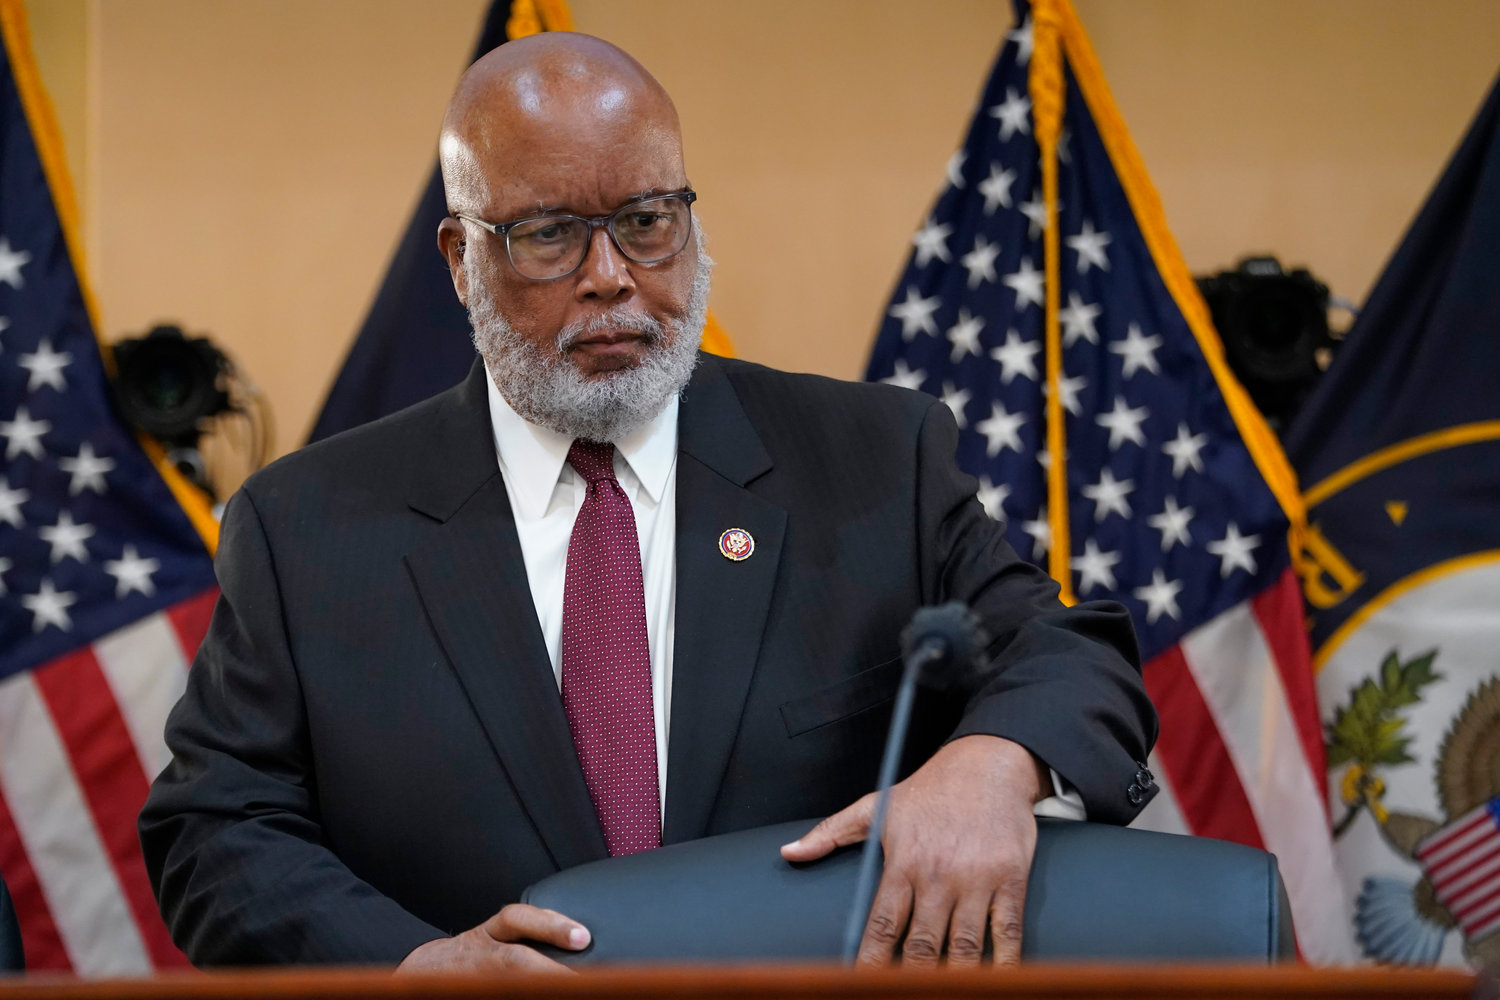 Chairman Rep. Bennie Thompson, D-Miss., arrives as the House select committee investigating the Jan. 6 attack on the U.S. Capitol continues to reveal its findings of a year-long investigation, at the Capitol in Washington, Tuesday, June 21, 2022. (AP Photo/Jacquelyn Martin)